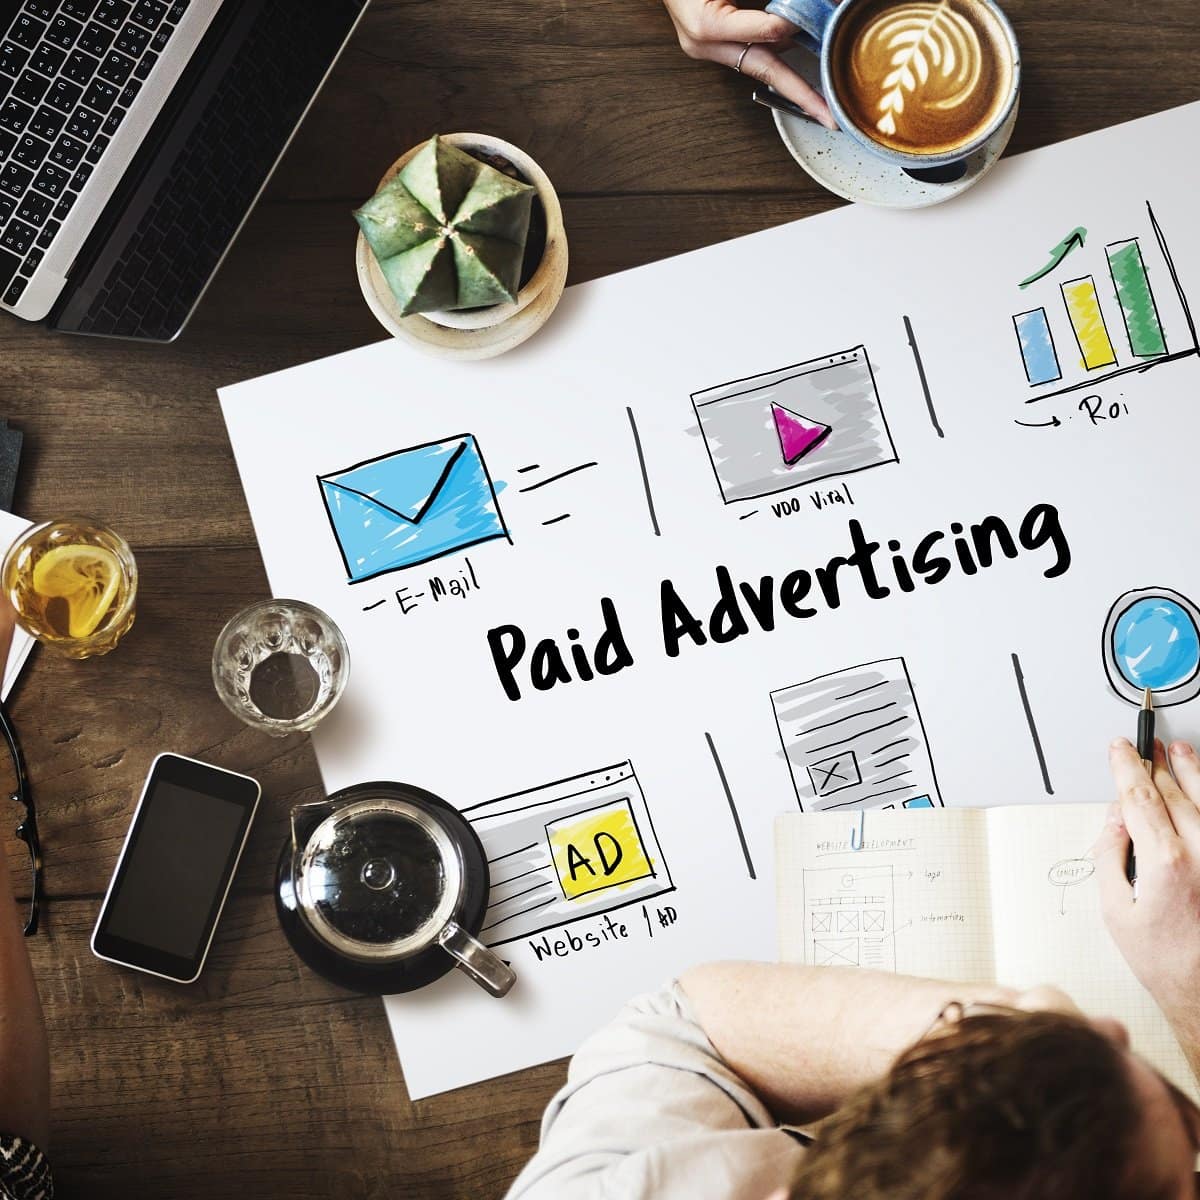 Manufacturers’ Guide to Paid Advertising